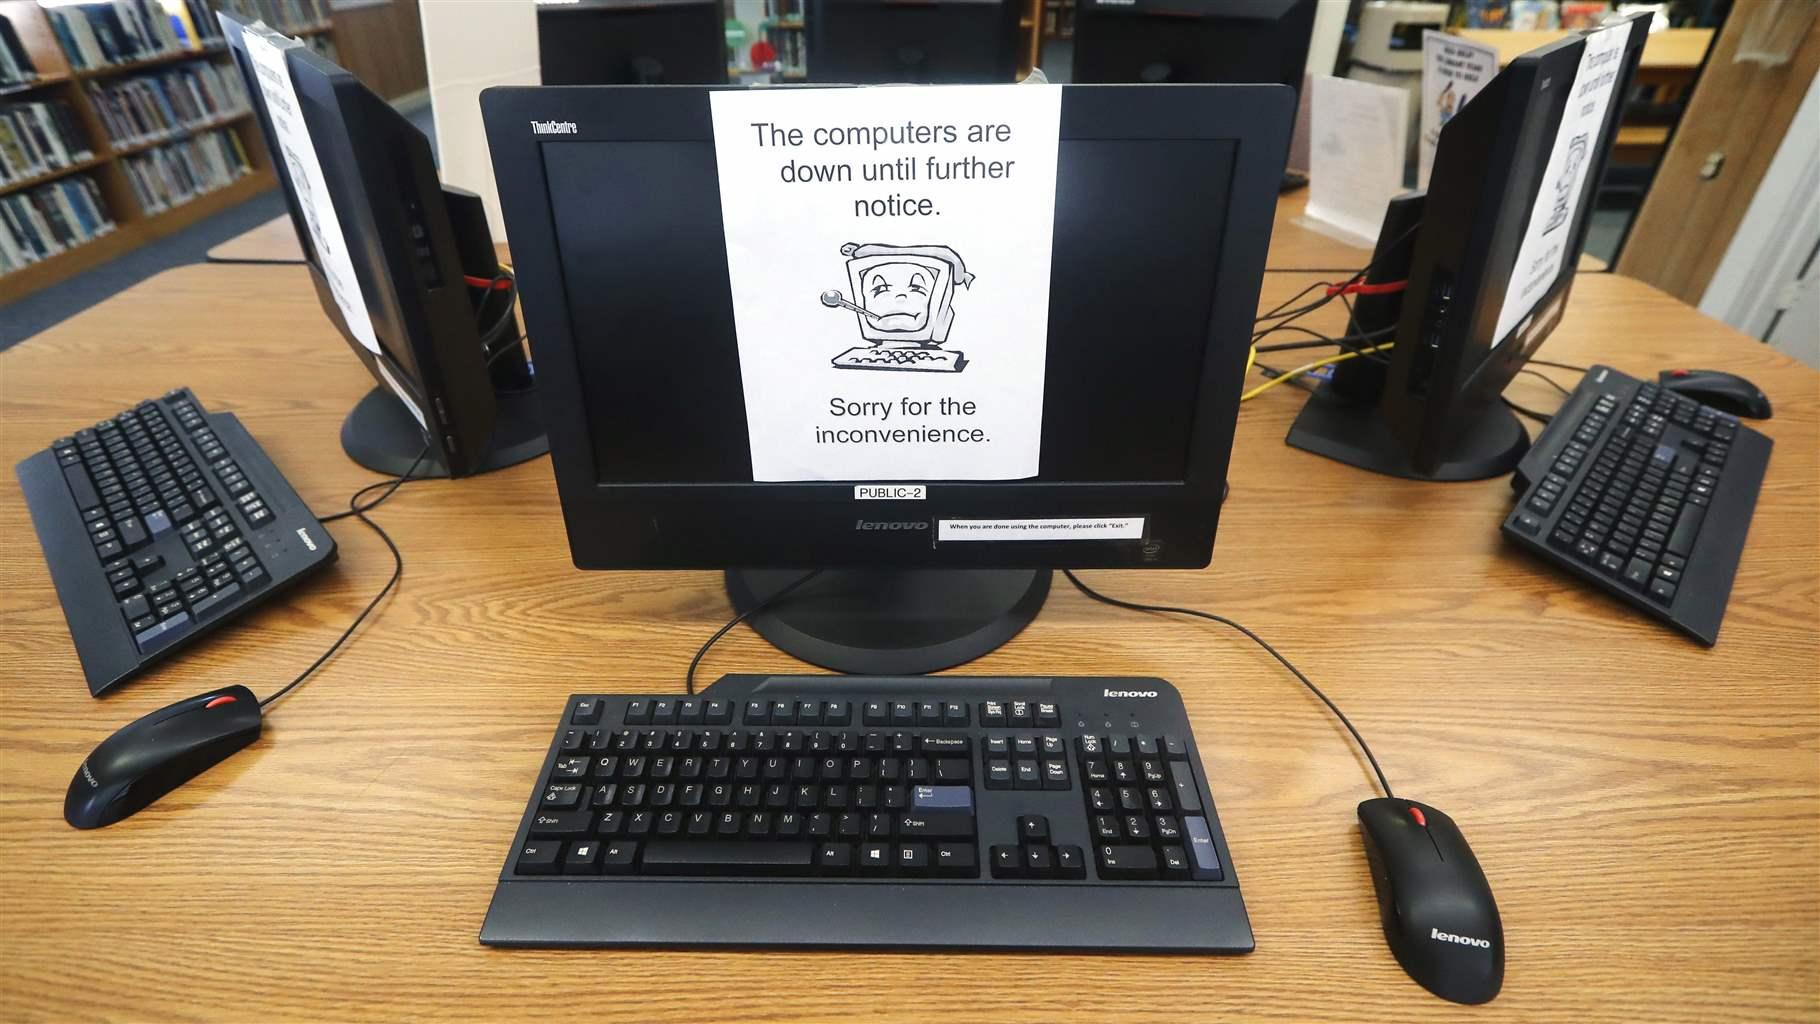 Library computer down